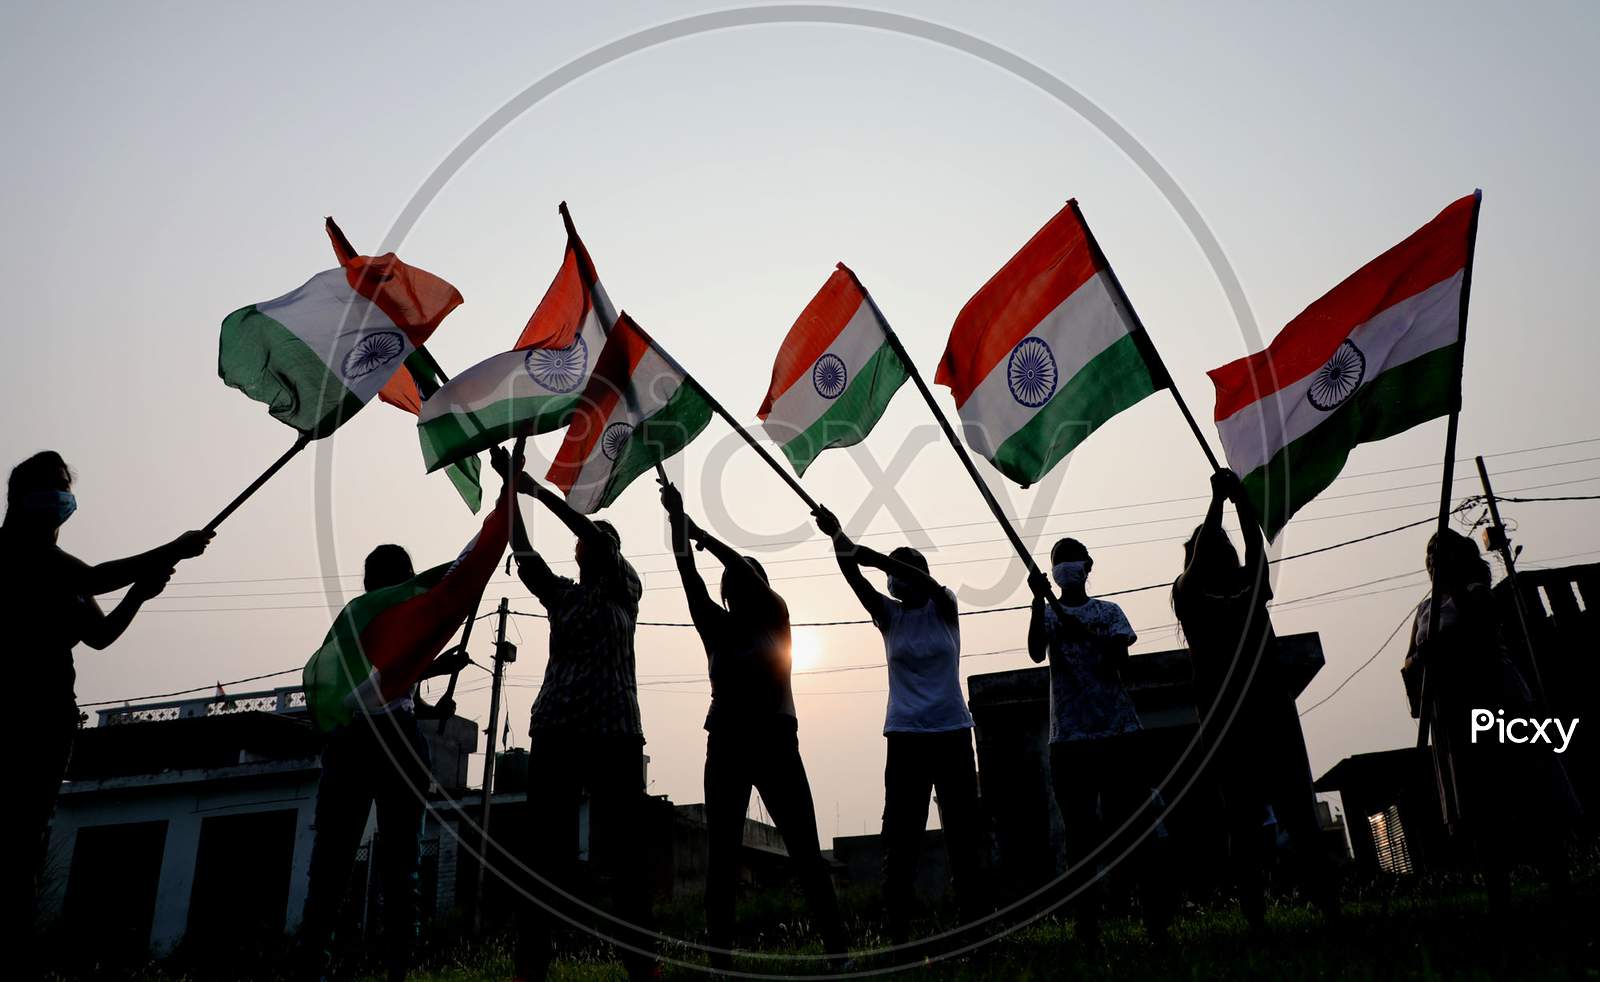 Girls hold the tricolor during rehearsals ahead of Independence Day at Jammu on August 10 ,2020.